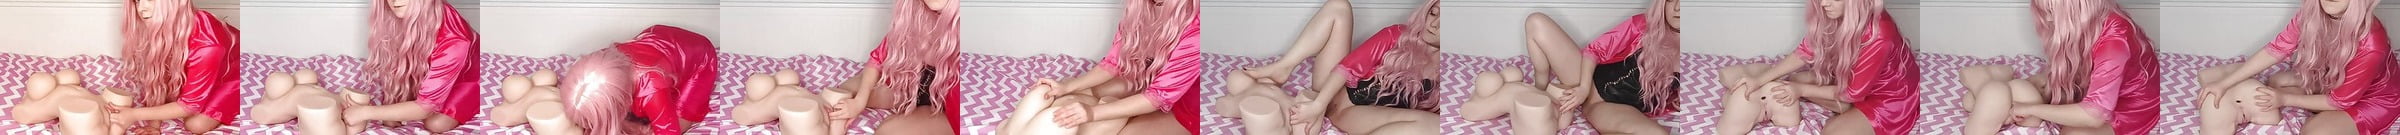 Chelsea Rose Reviews The Tantaly Sex Doll Free Hd Porn 7c Xhamster